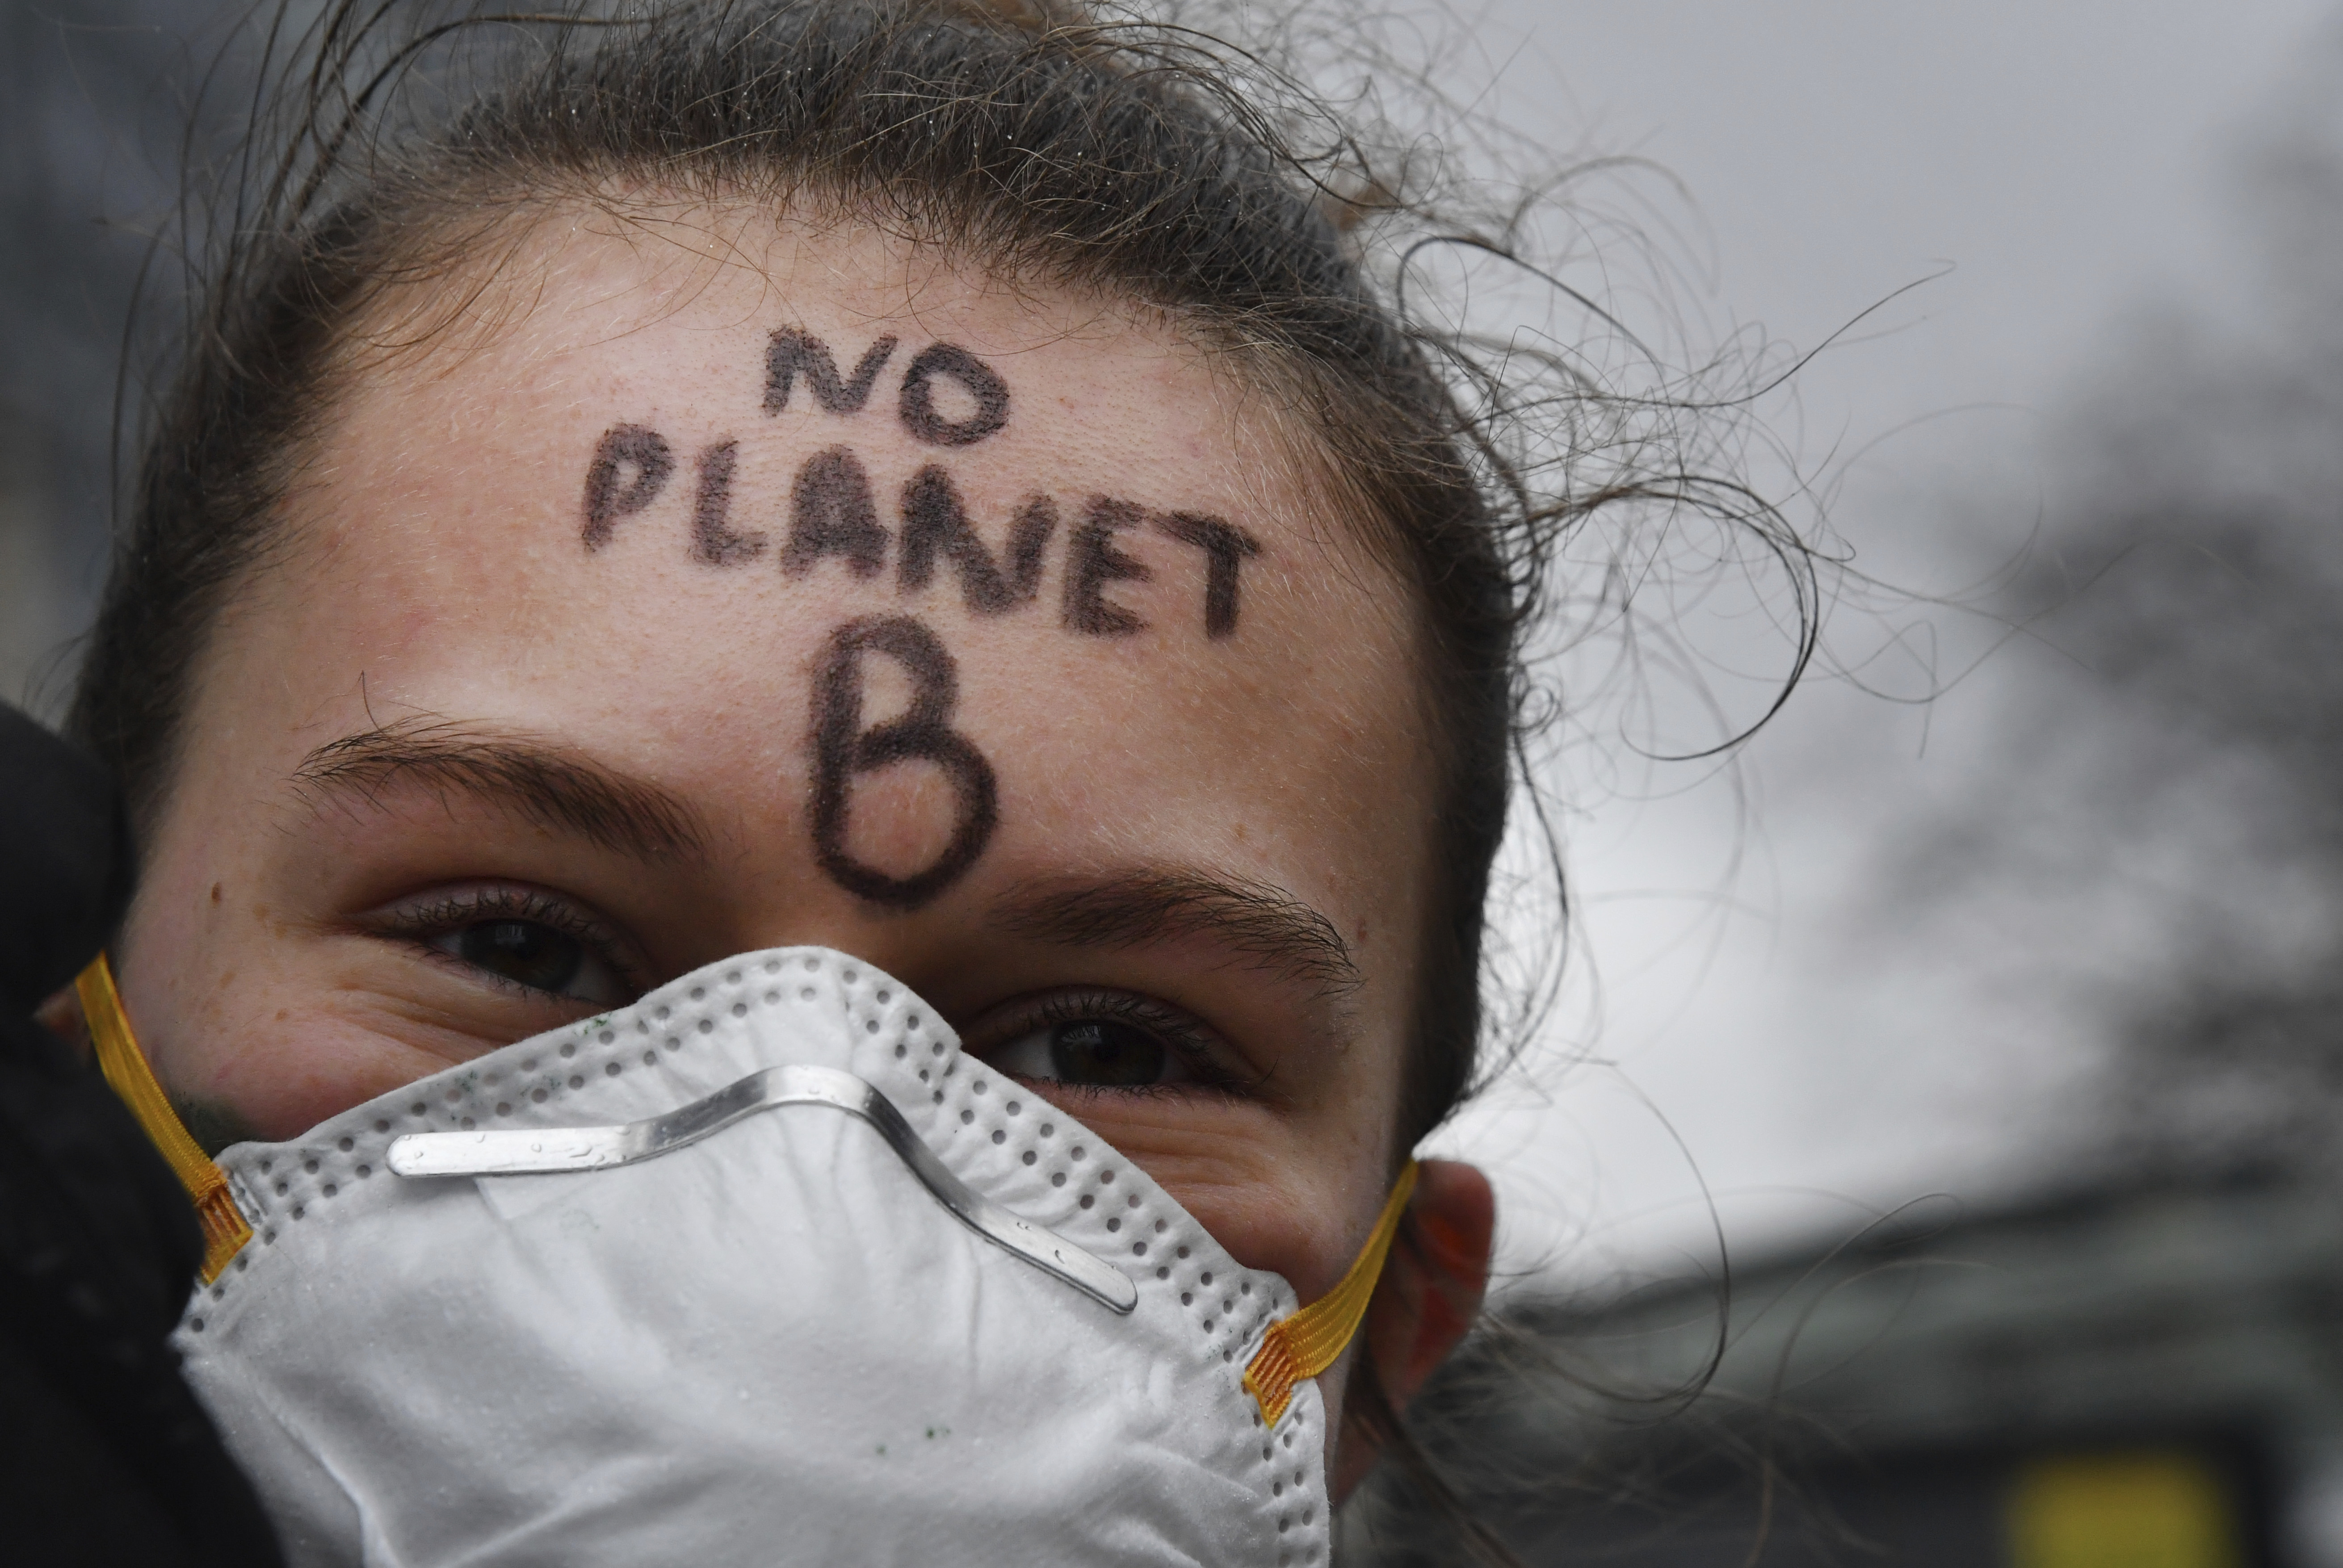 A protestor marches with a face mask and a message on her forehead during a Rise for the Climate demonstration in Brussels, Sunday, Jan. 27, 2019. (AP Photo/Geert Vanden Wijngaert)